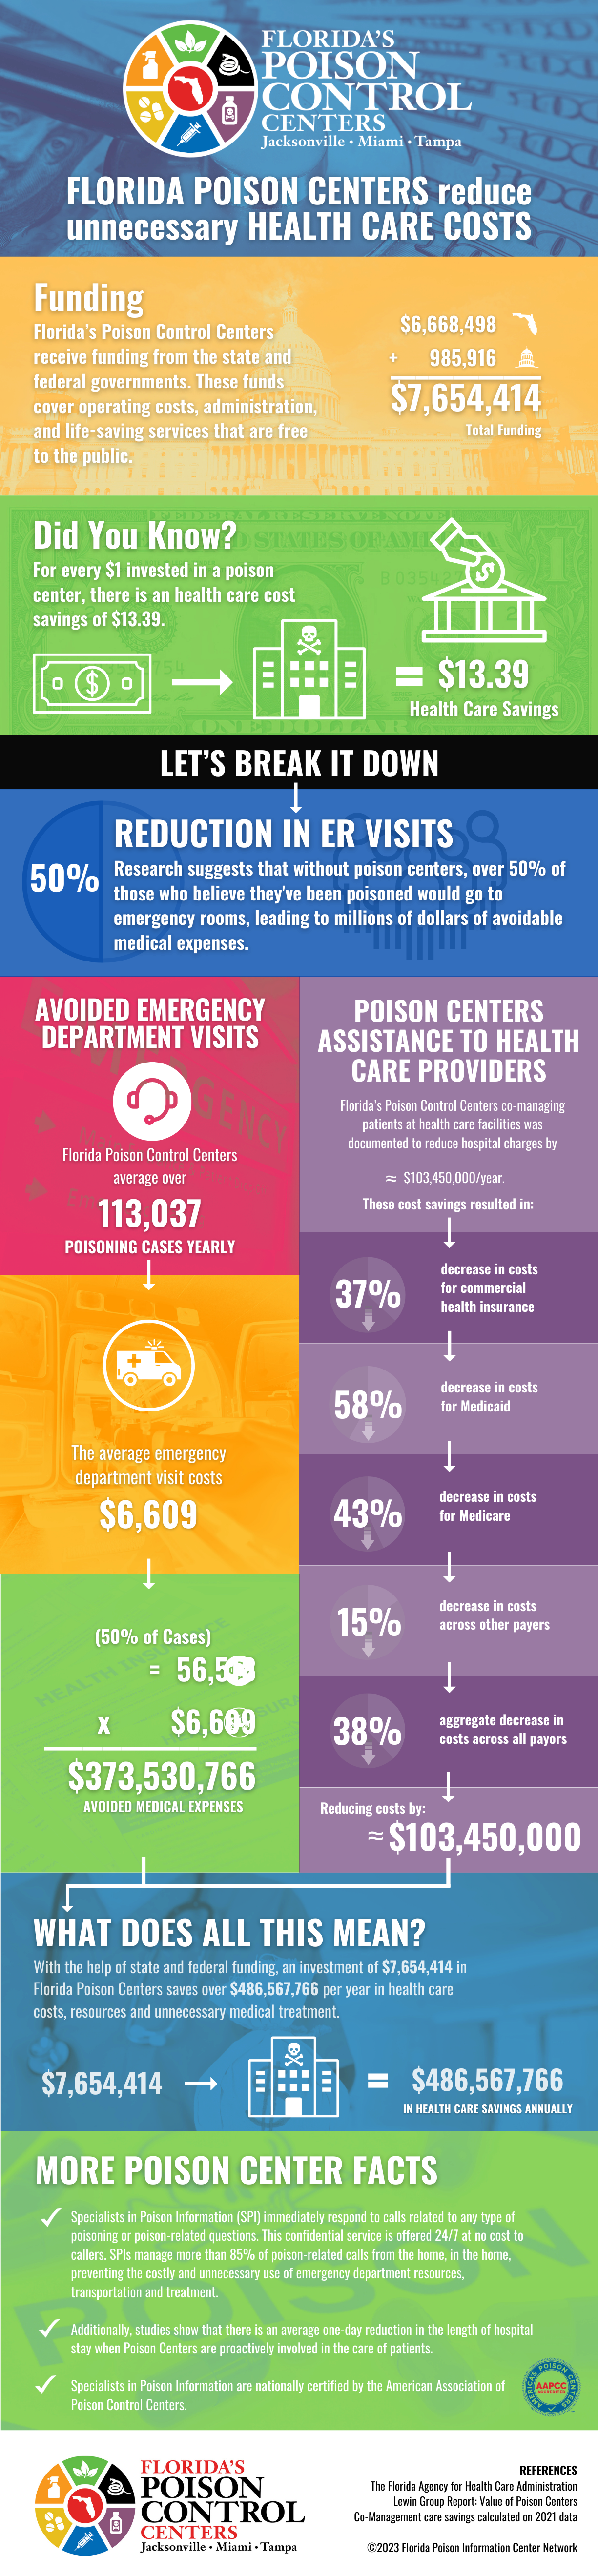 Florida's Poison Control Centers reduce unnecessary health care costs.